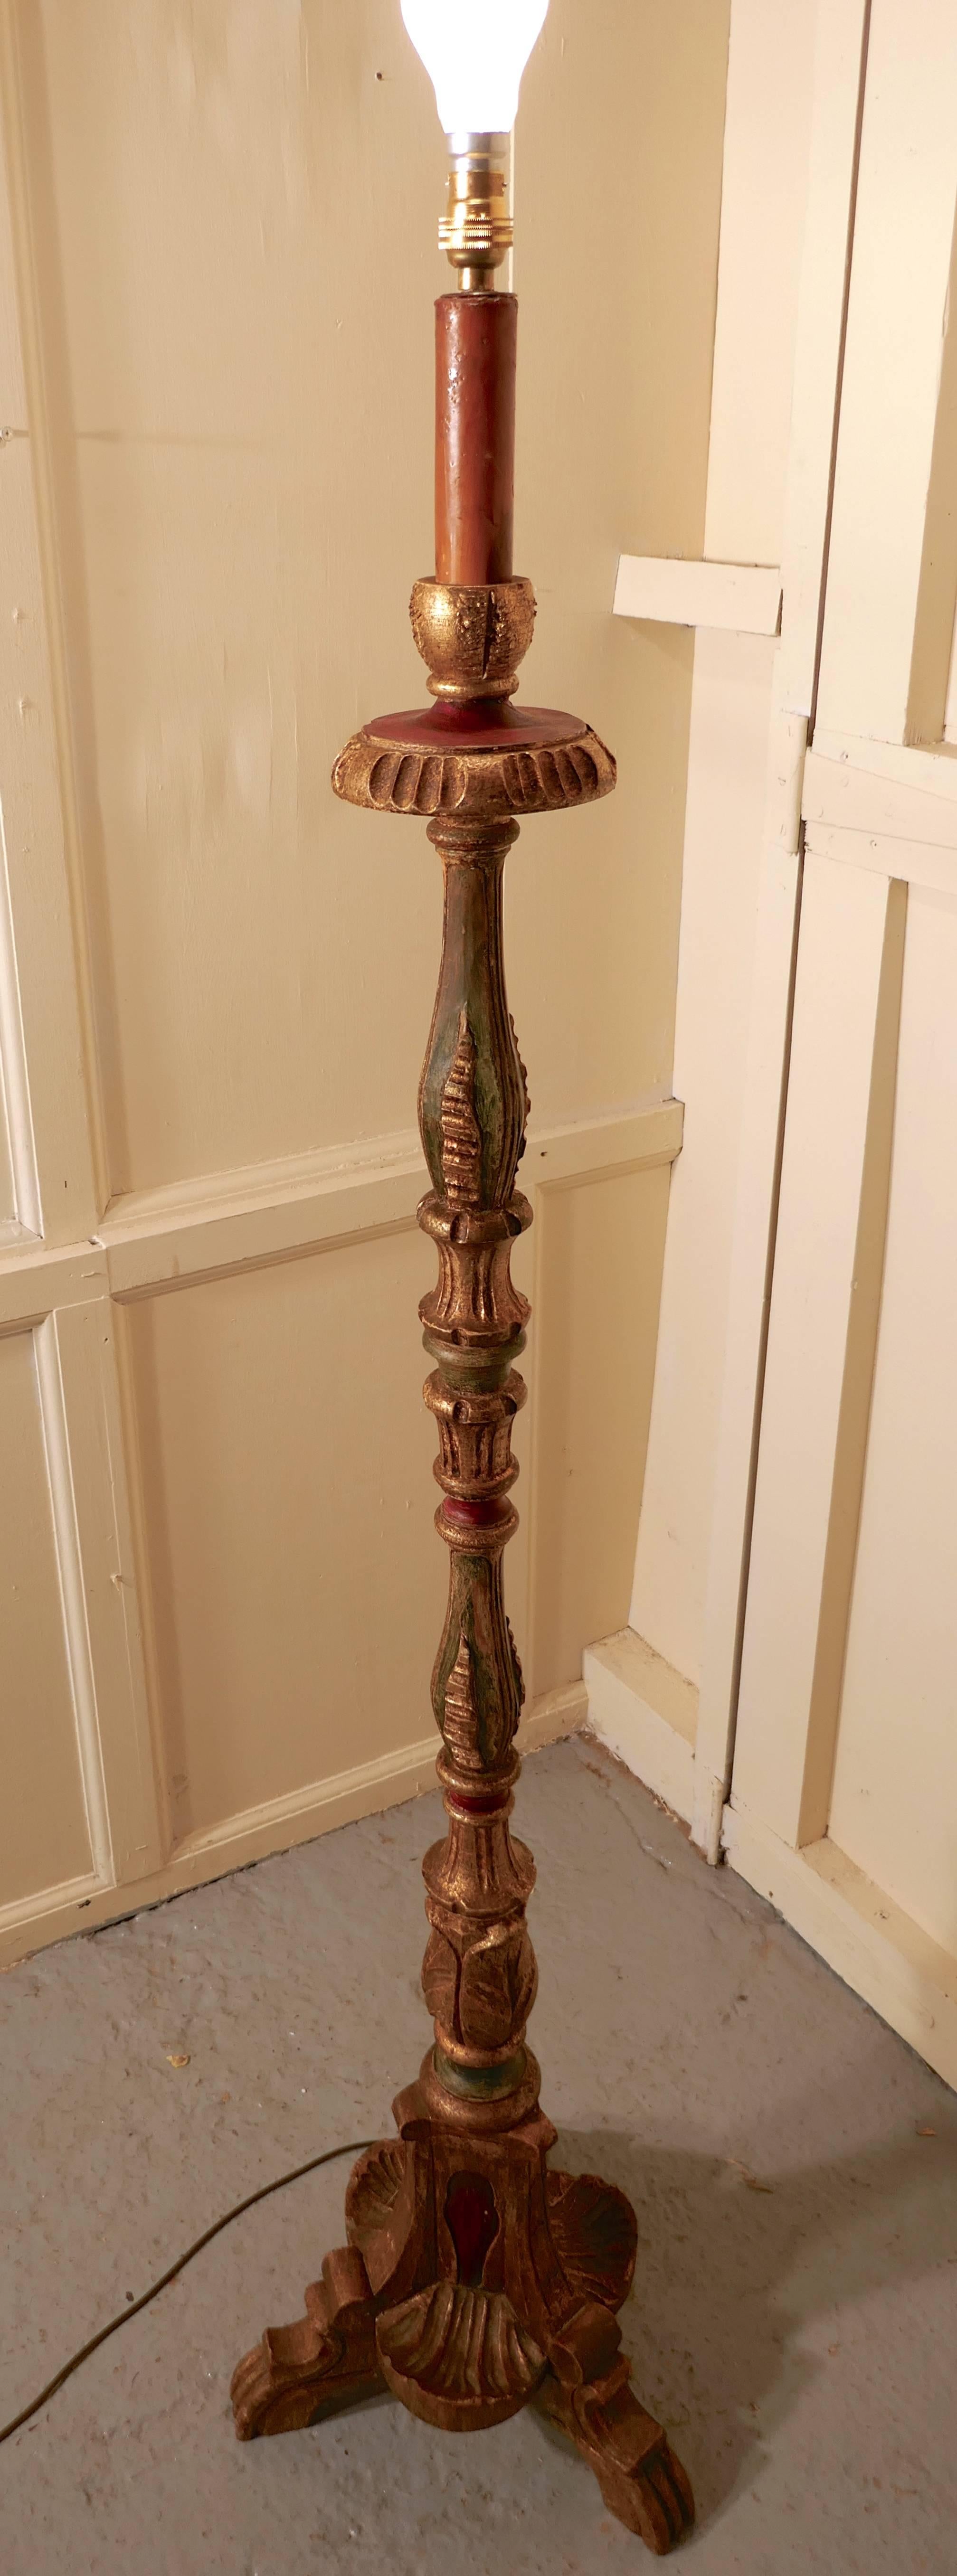 20th Century French Carved Gilt Floor Standing or Standard Lamp